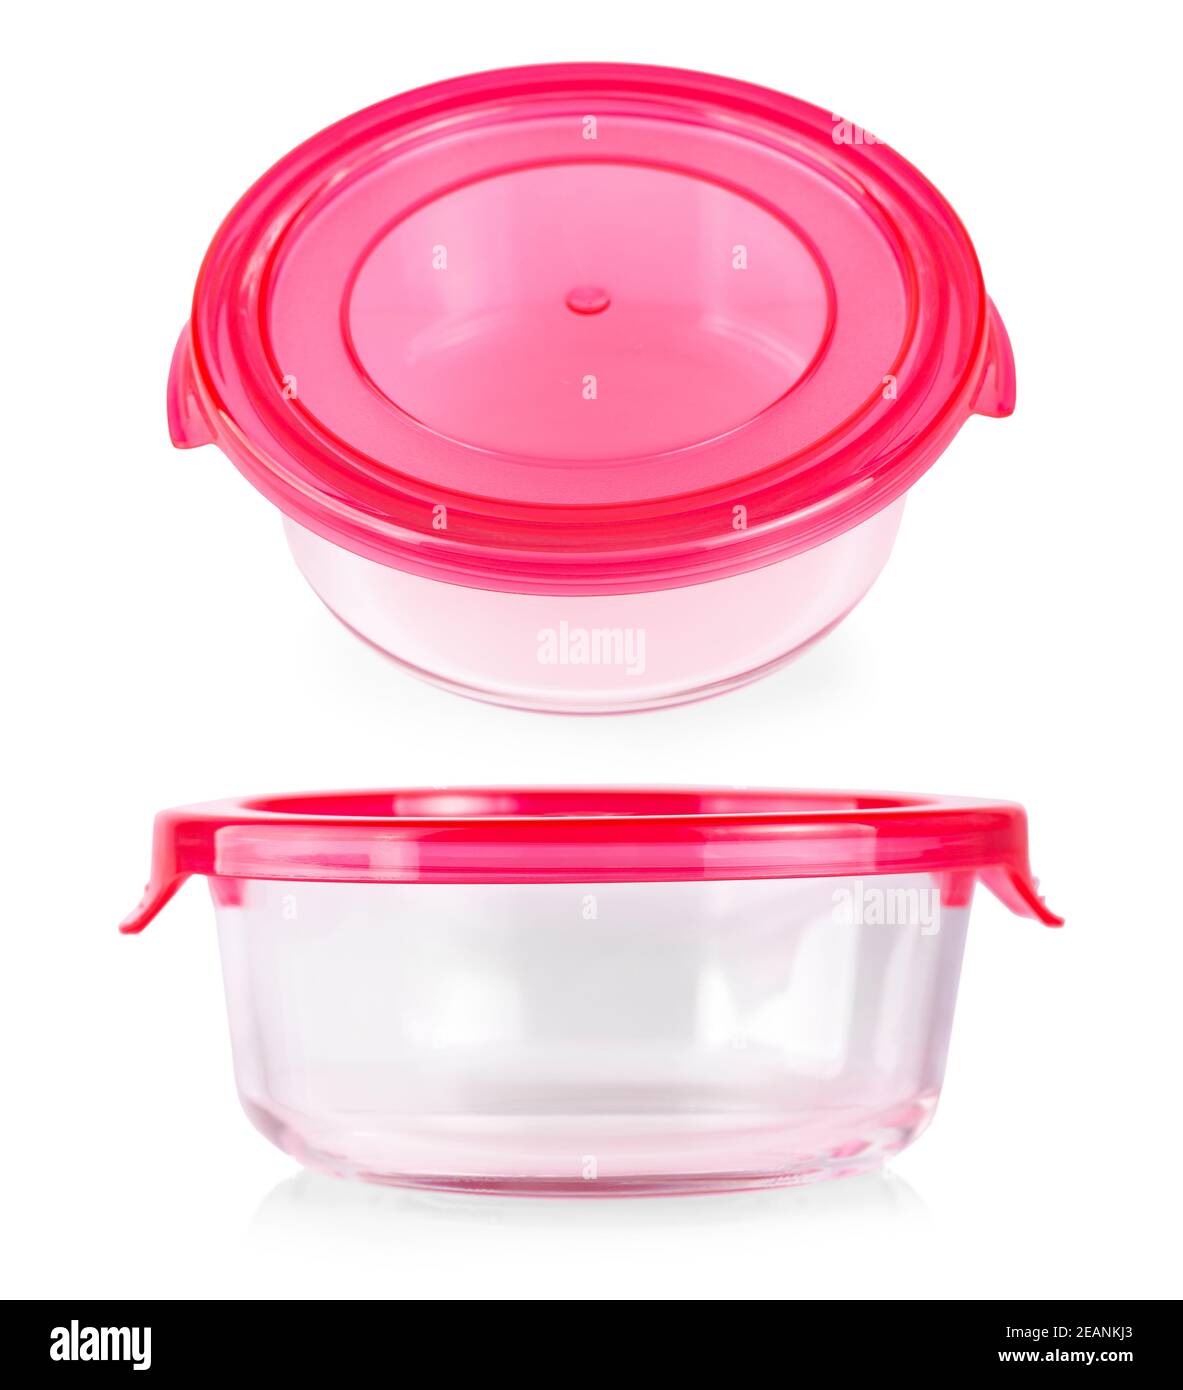 https://c8.alamy.com/comp/2EANKJ3/the-glass-food-container-with-red-plastic-lid-2EANKJ3.jpg